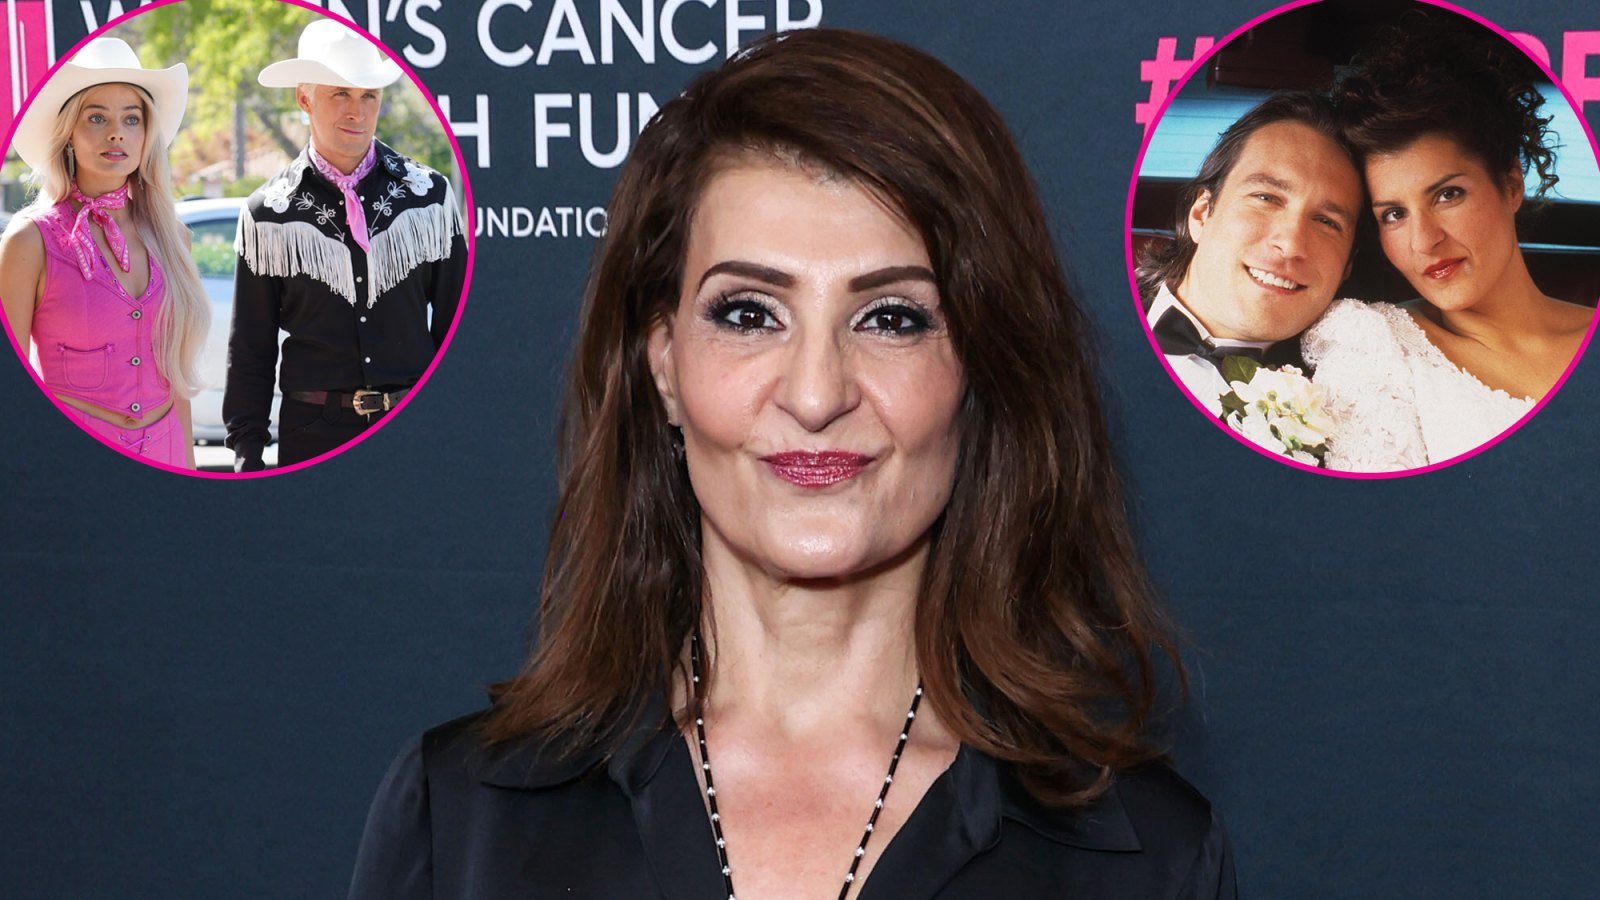 Nia Vardalos Laments on Critical 'Barbie' Reviews, Relates From 'Big Fat Greek Wedding' Experience